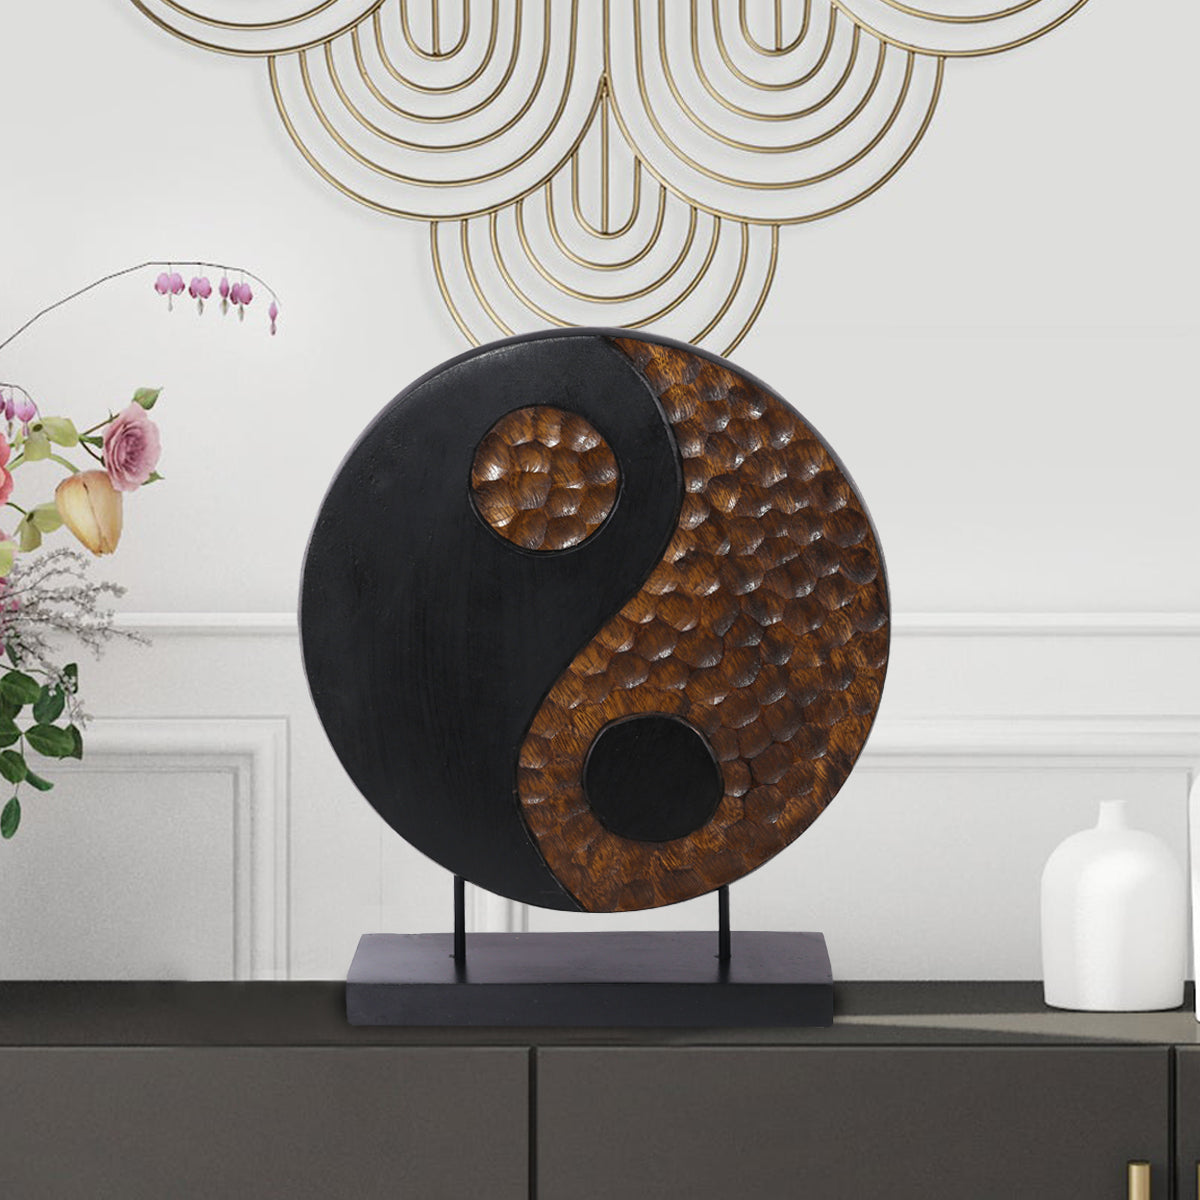 How to Invite Balance into Your Home with a Wooden Yin Yang Sculpture